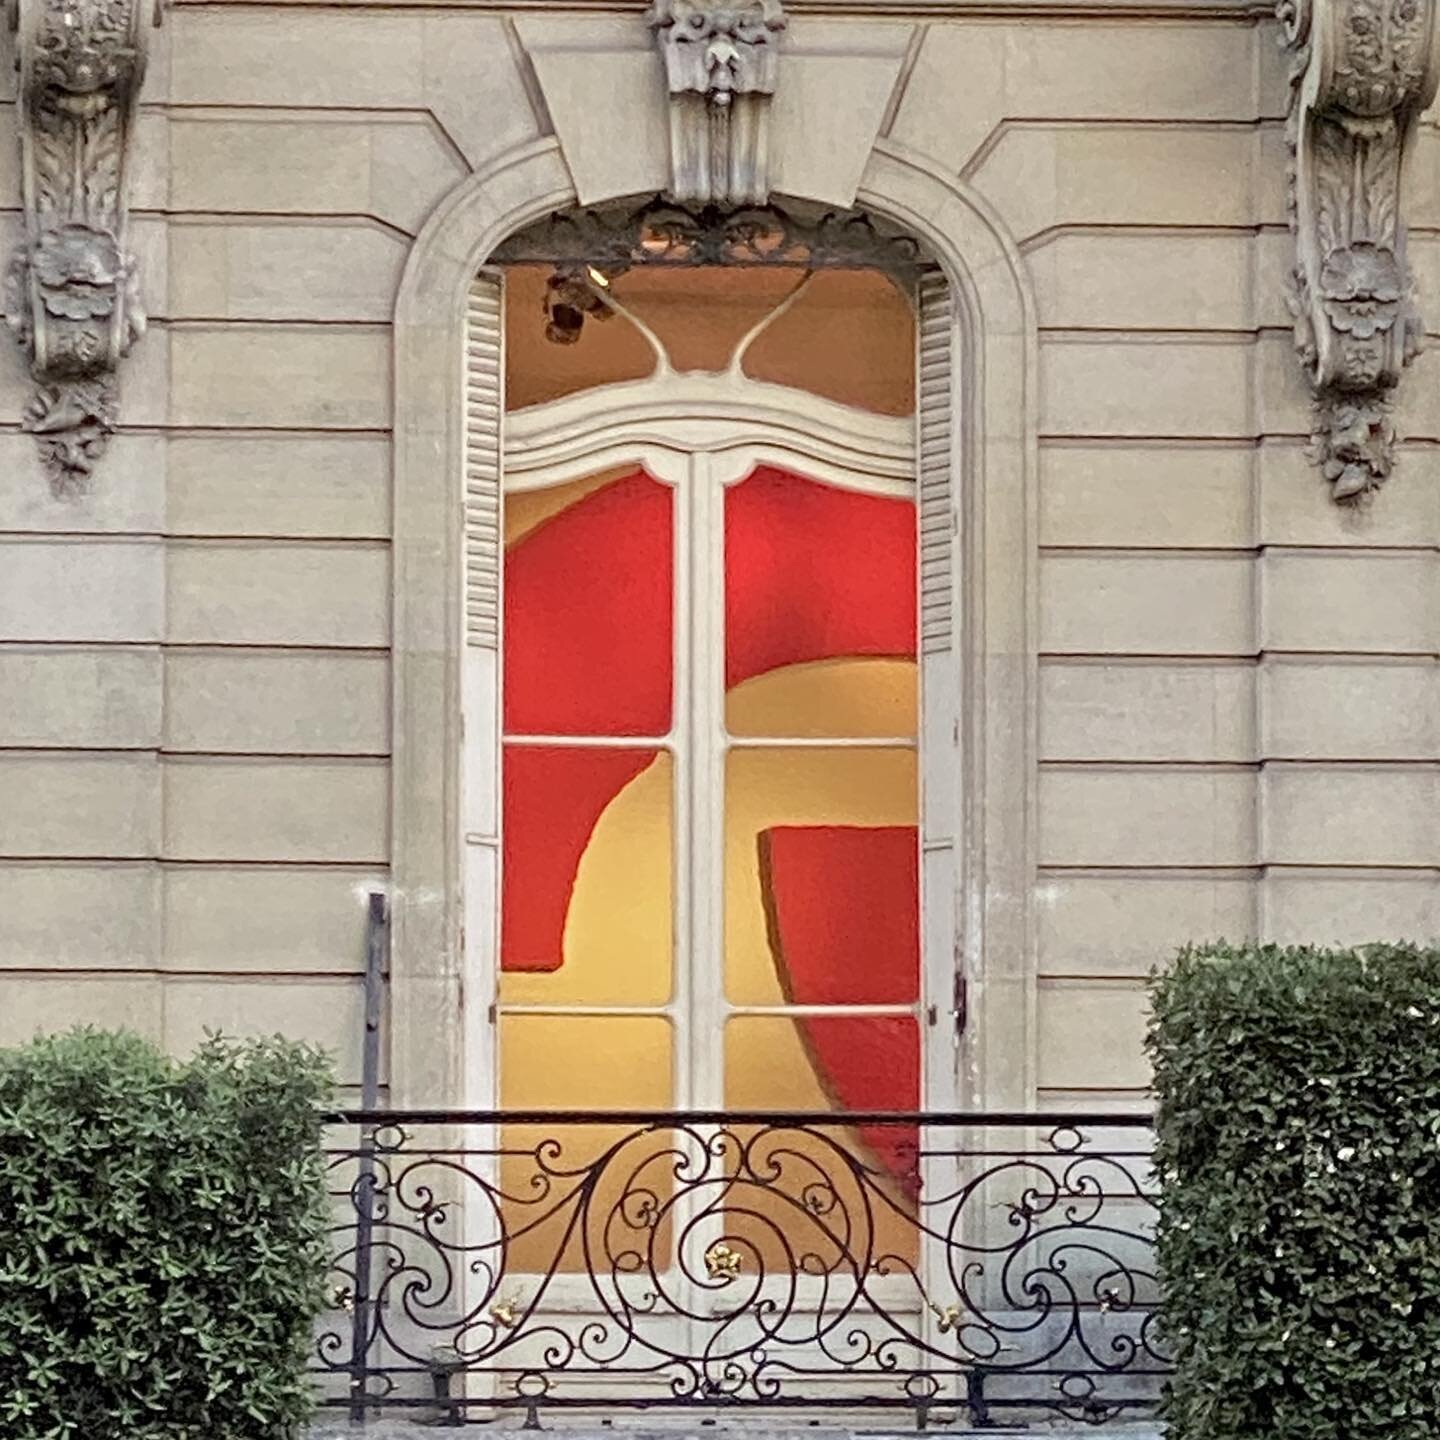 Loving every minute in Paris! Incredible beauty everywhere. Inside, outside. Old, new. Infinite details. ❤️🇫🇷